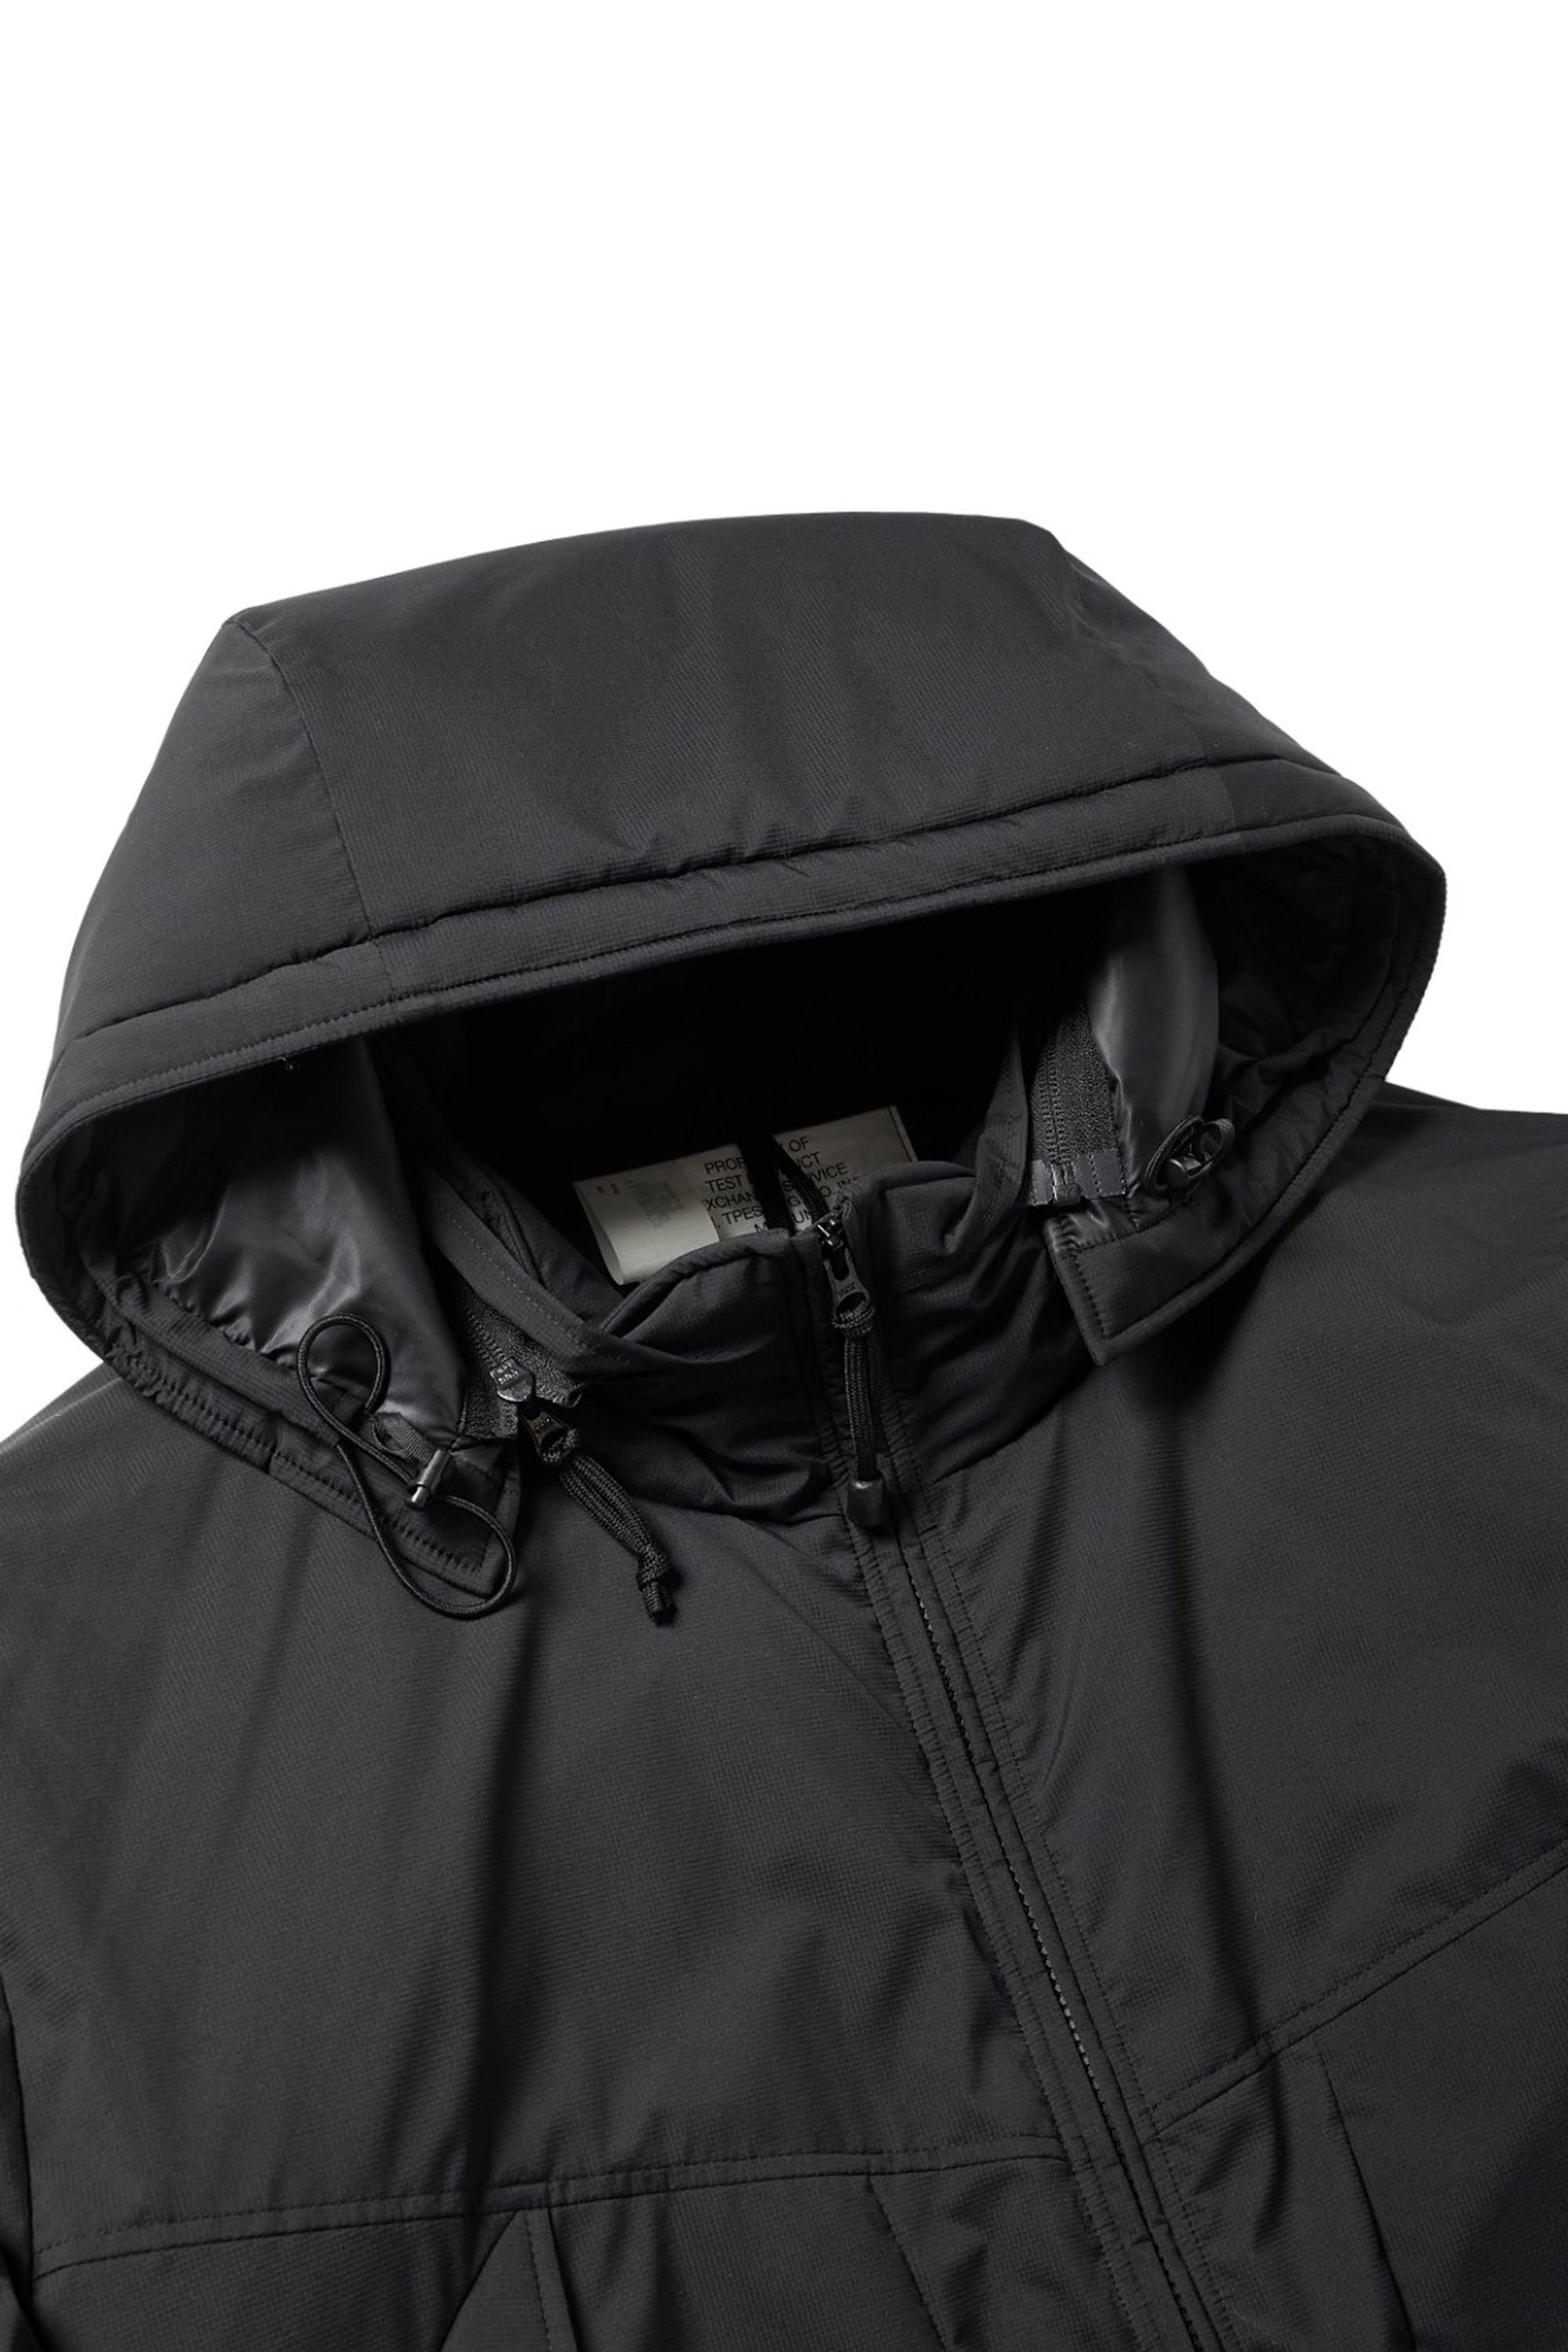 N. Hoolywood ×wild Things Monster Parka in Black for Men | Lyst